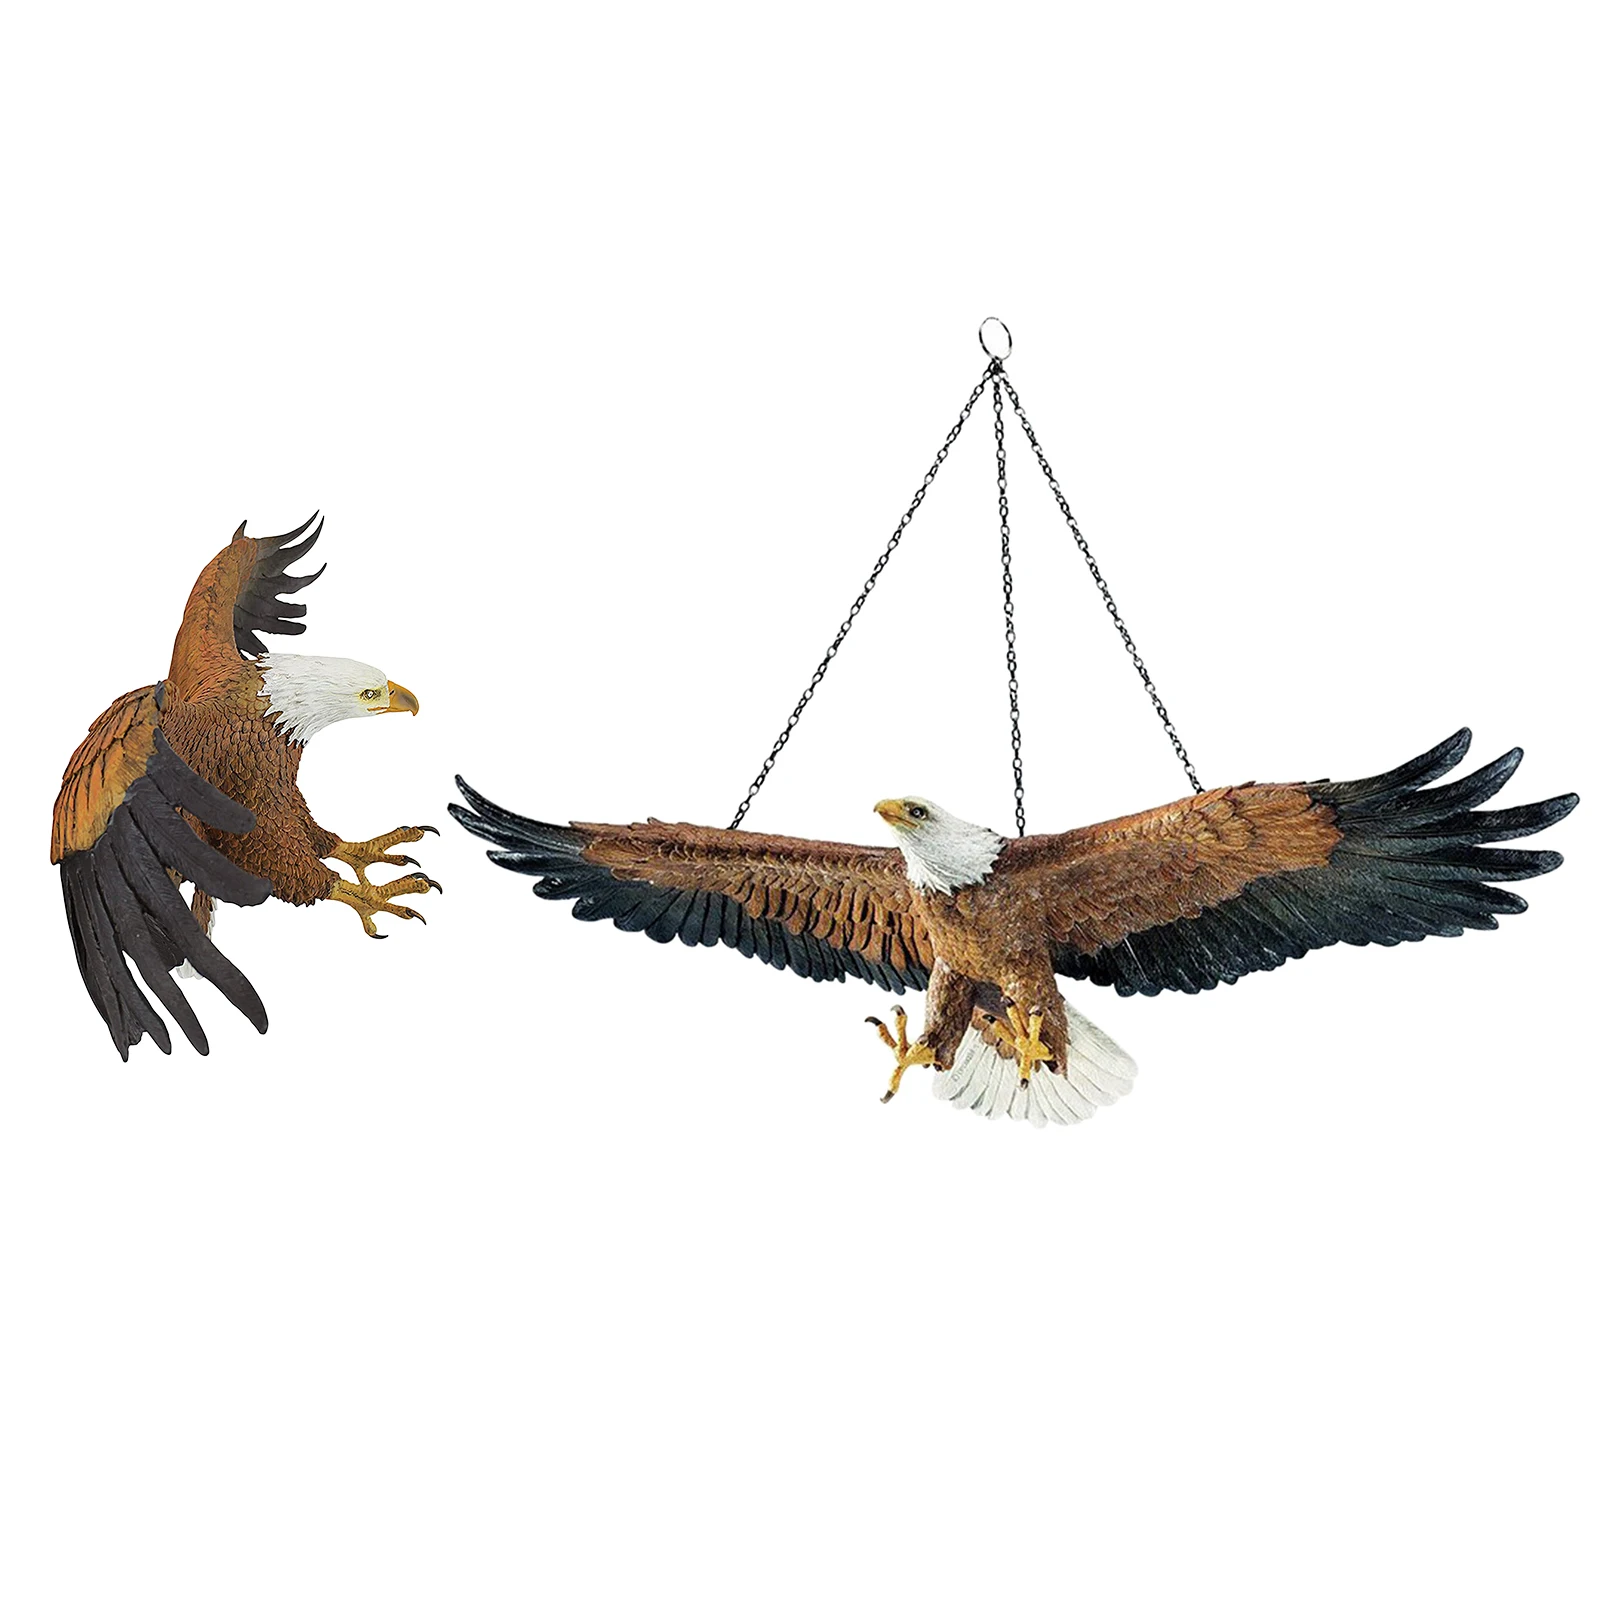 Hanging Eagle Garden Realistic Details for Any Yard Outdoor Wall Statue Art Home Decor Figurines Statue Garden Sculptures